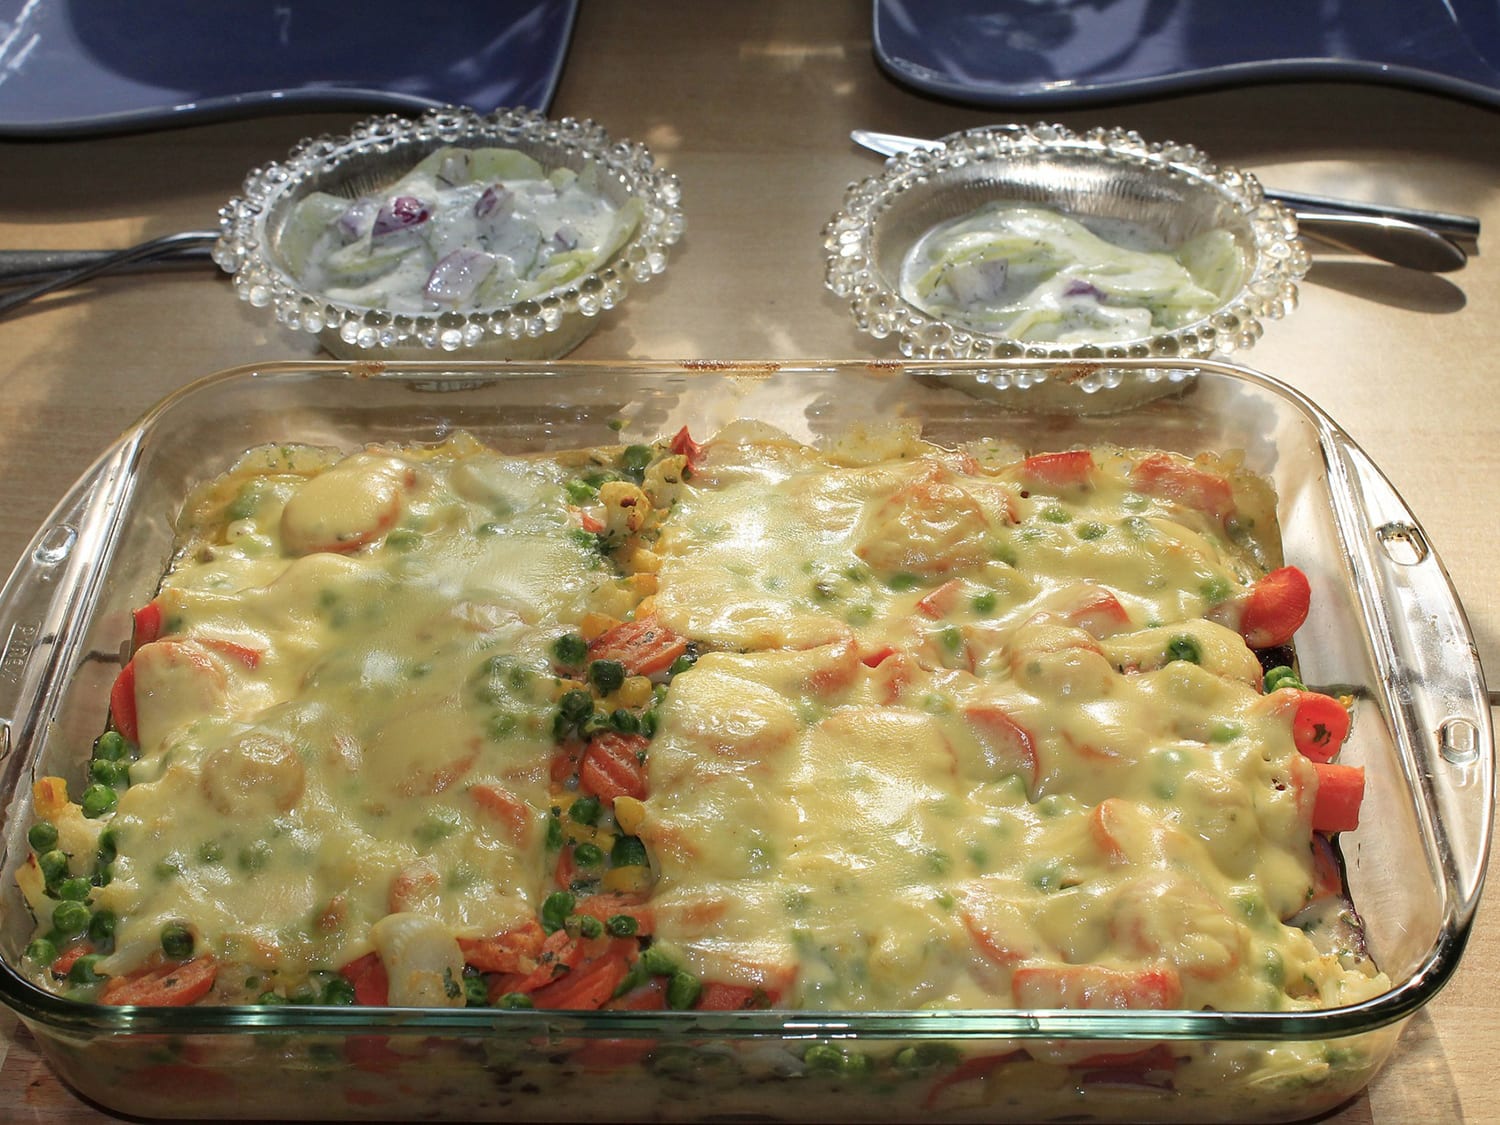 Casserole in dish on table.